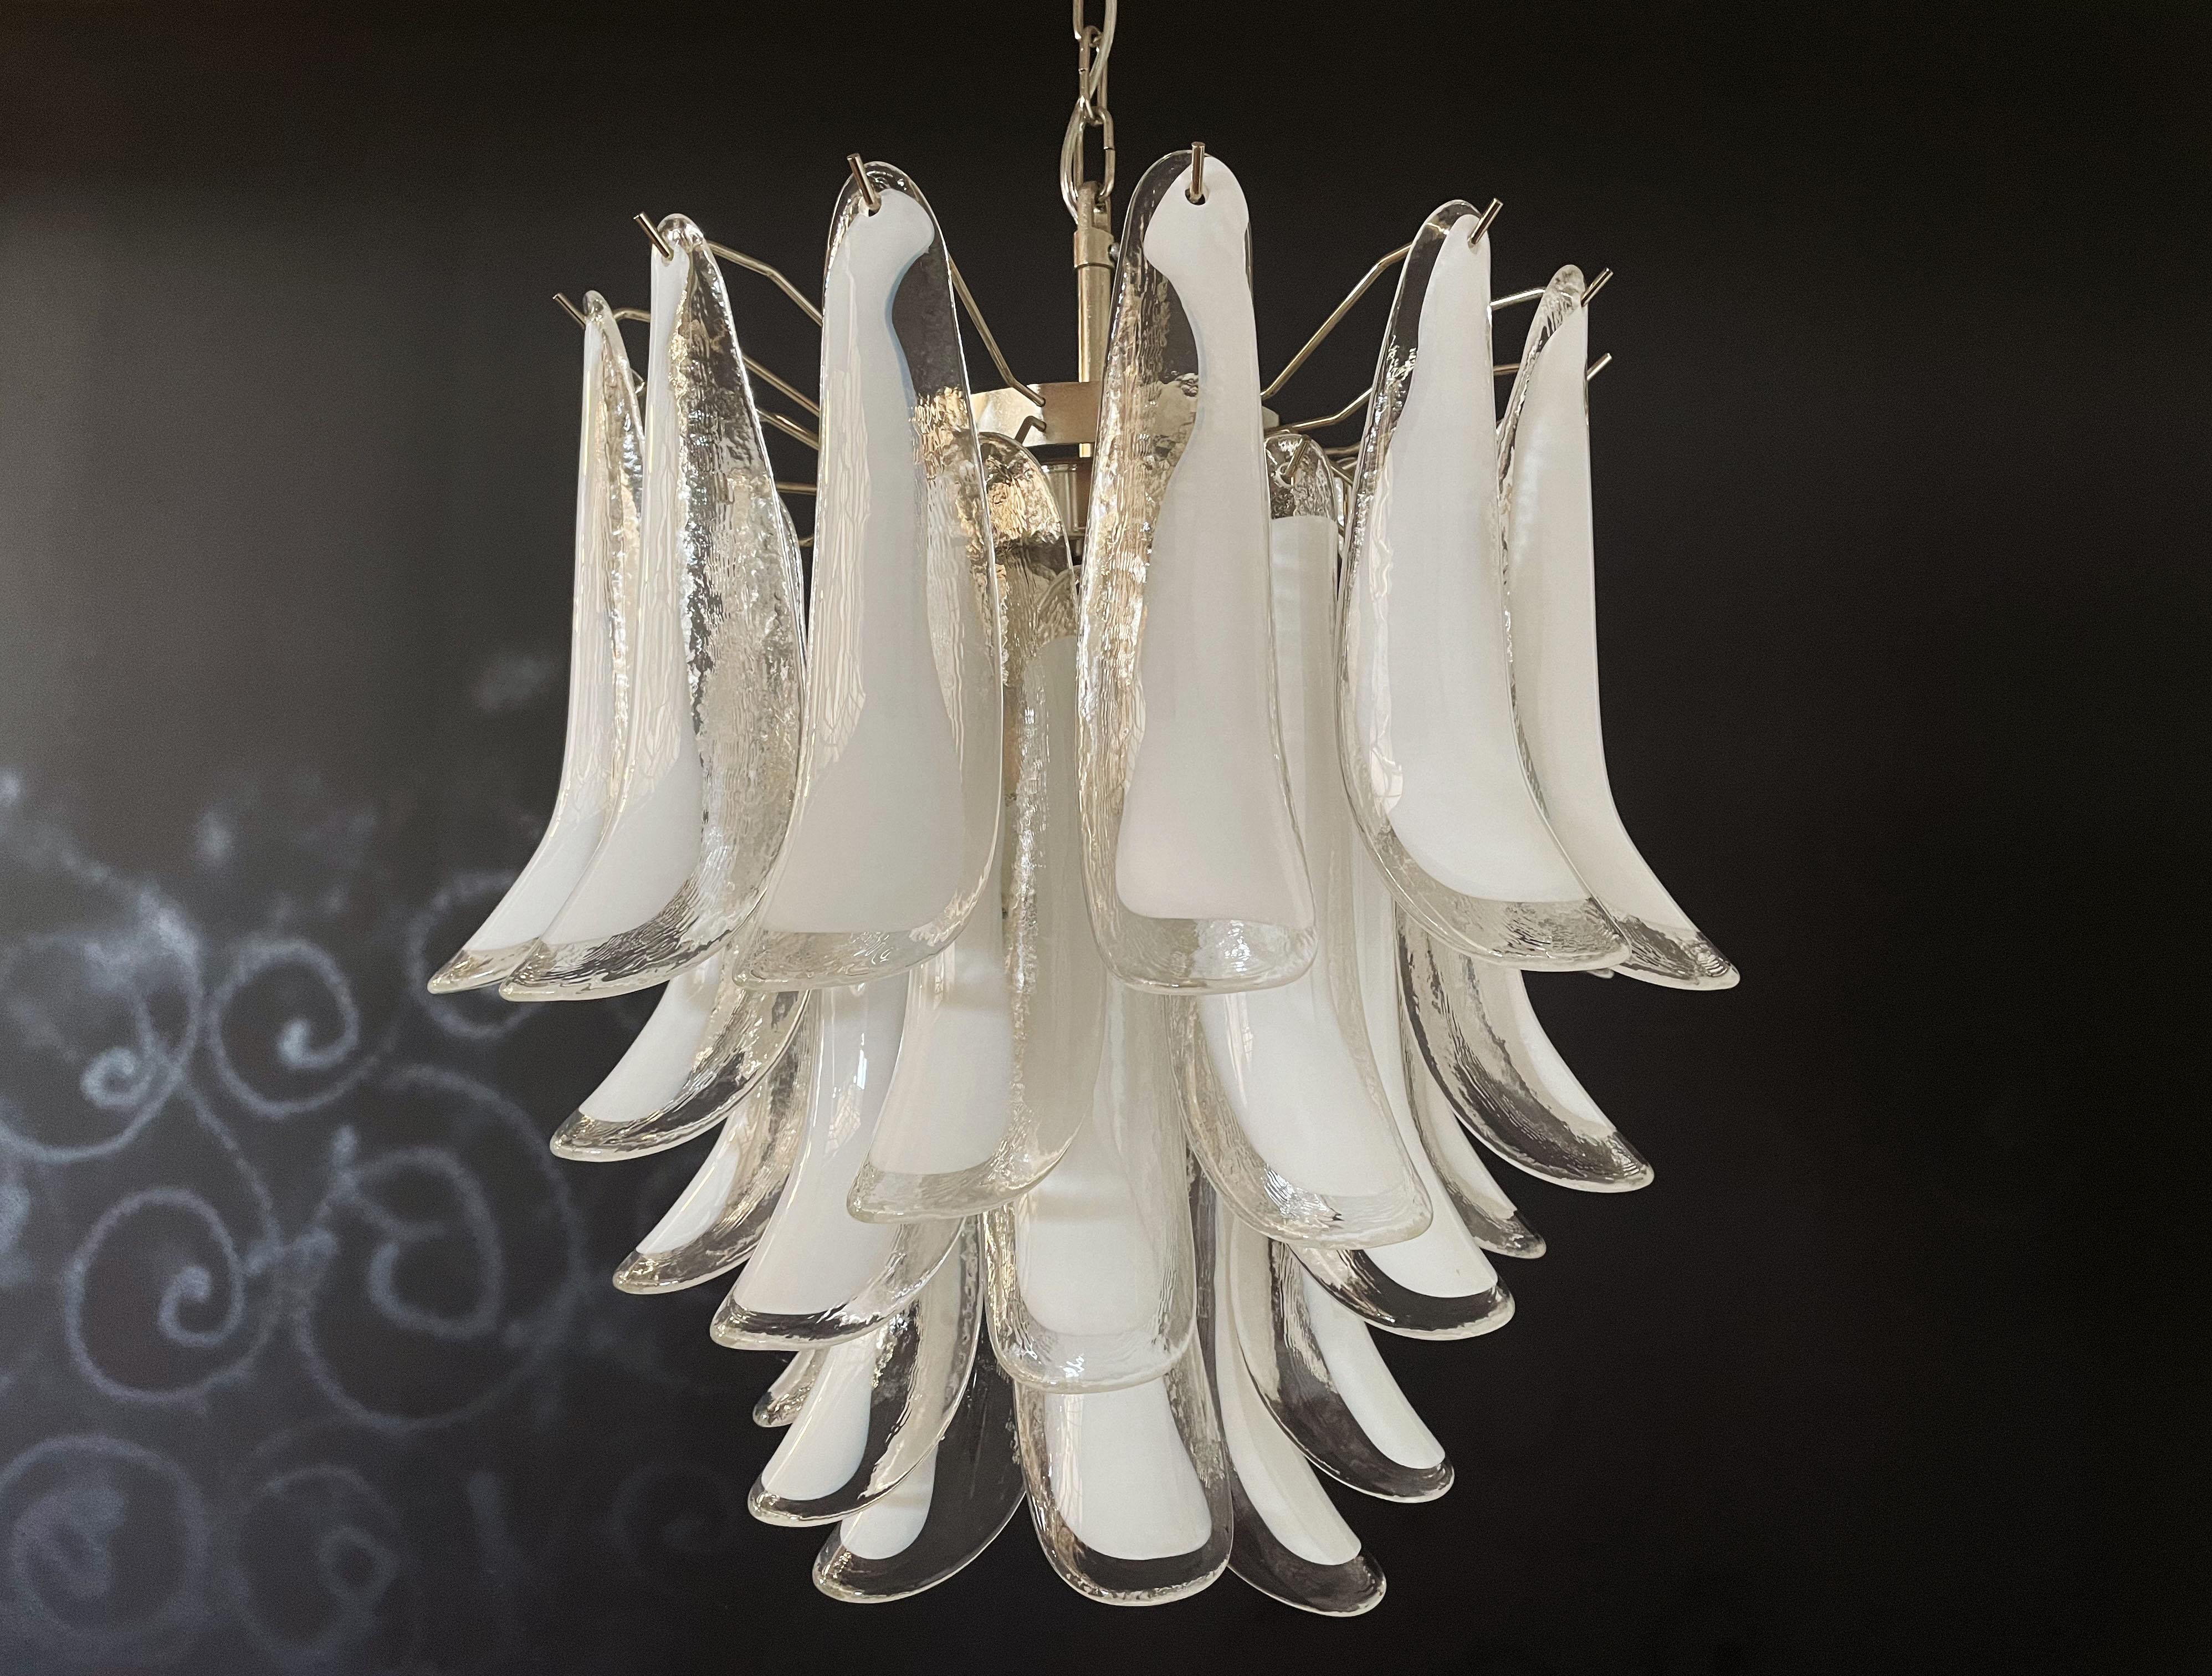 Huge Italian vintage Murano chandelier made by 41 glass petals (transparent and white “lattimo”) in a chrome frame.
Period: 1760's / 180's
Dimensions: 46 inches (117 cm) height with chain; 25,60 inches (65 cm) height without chain; 22,85 inches